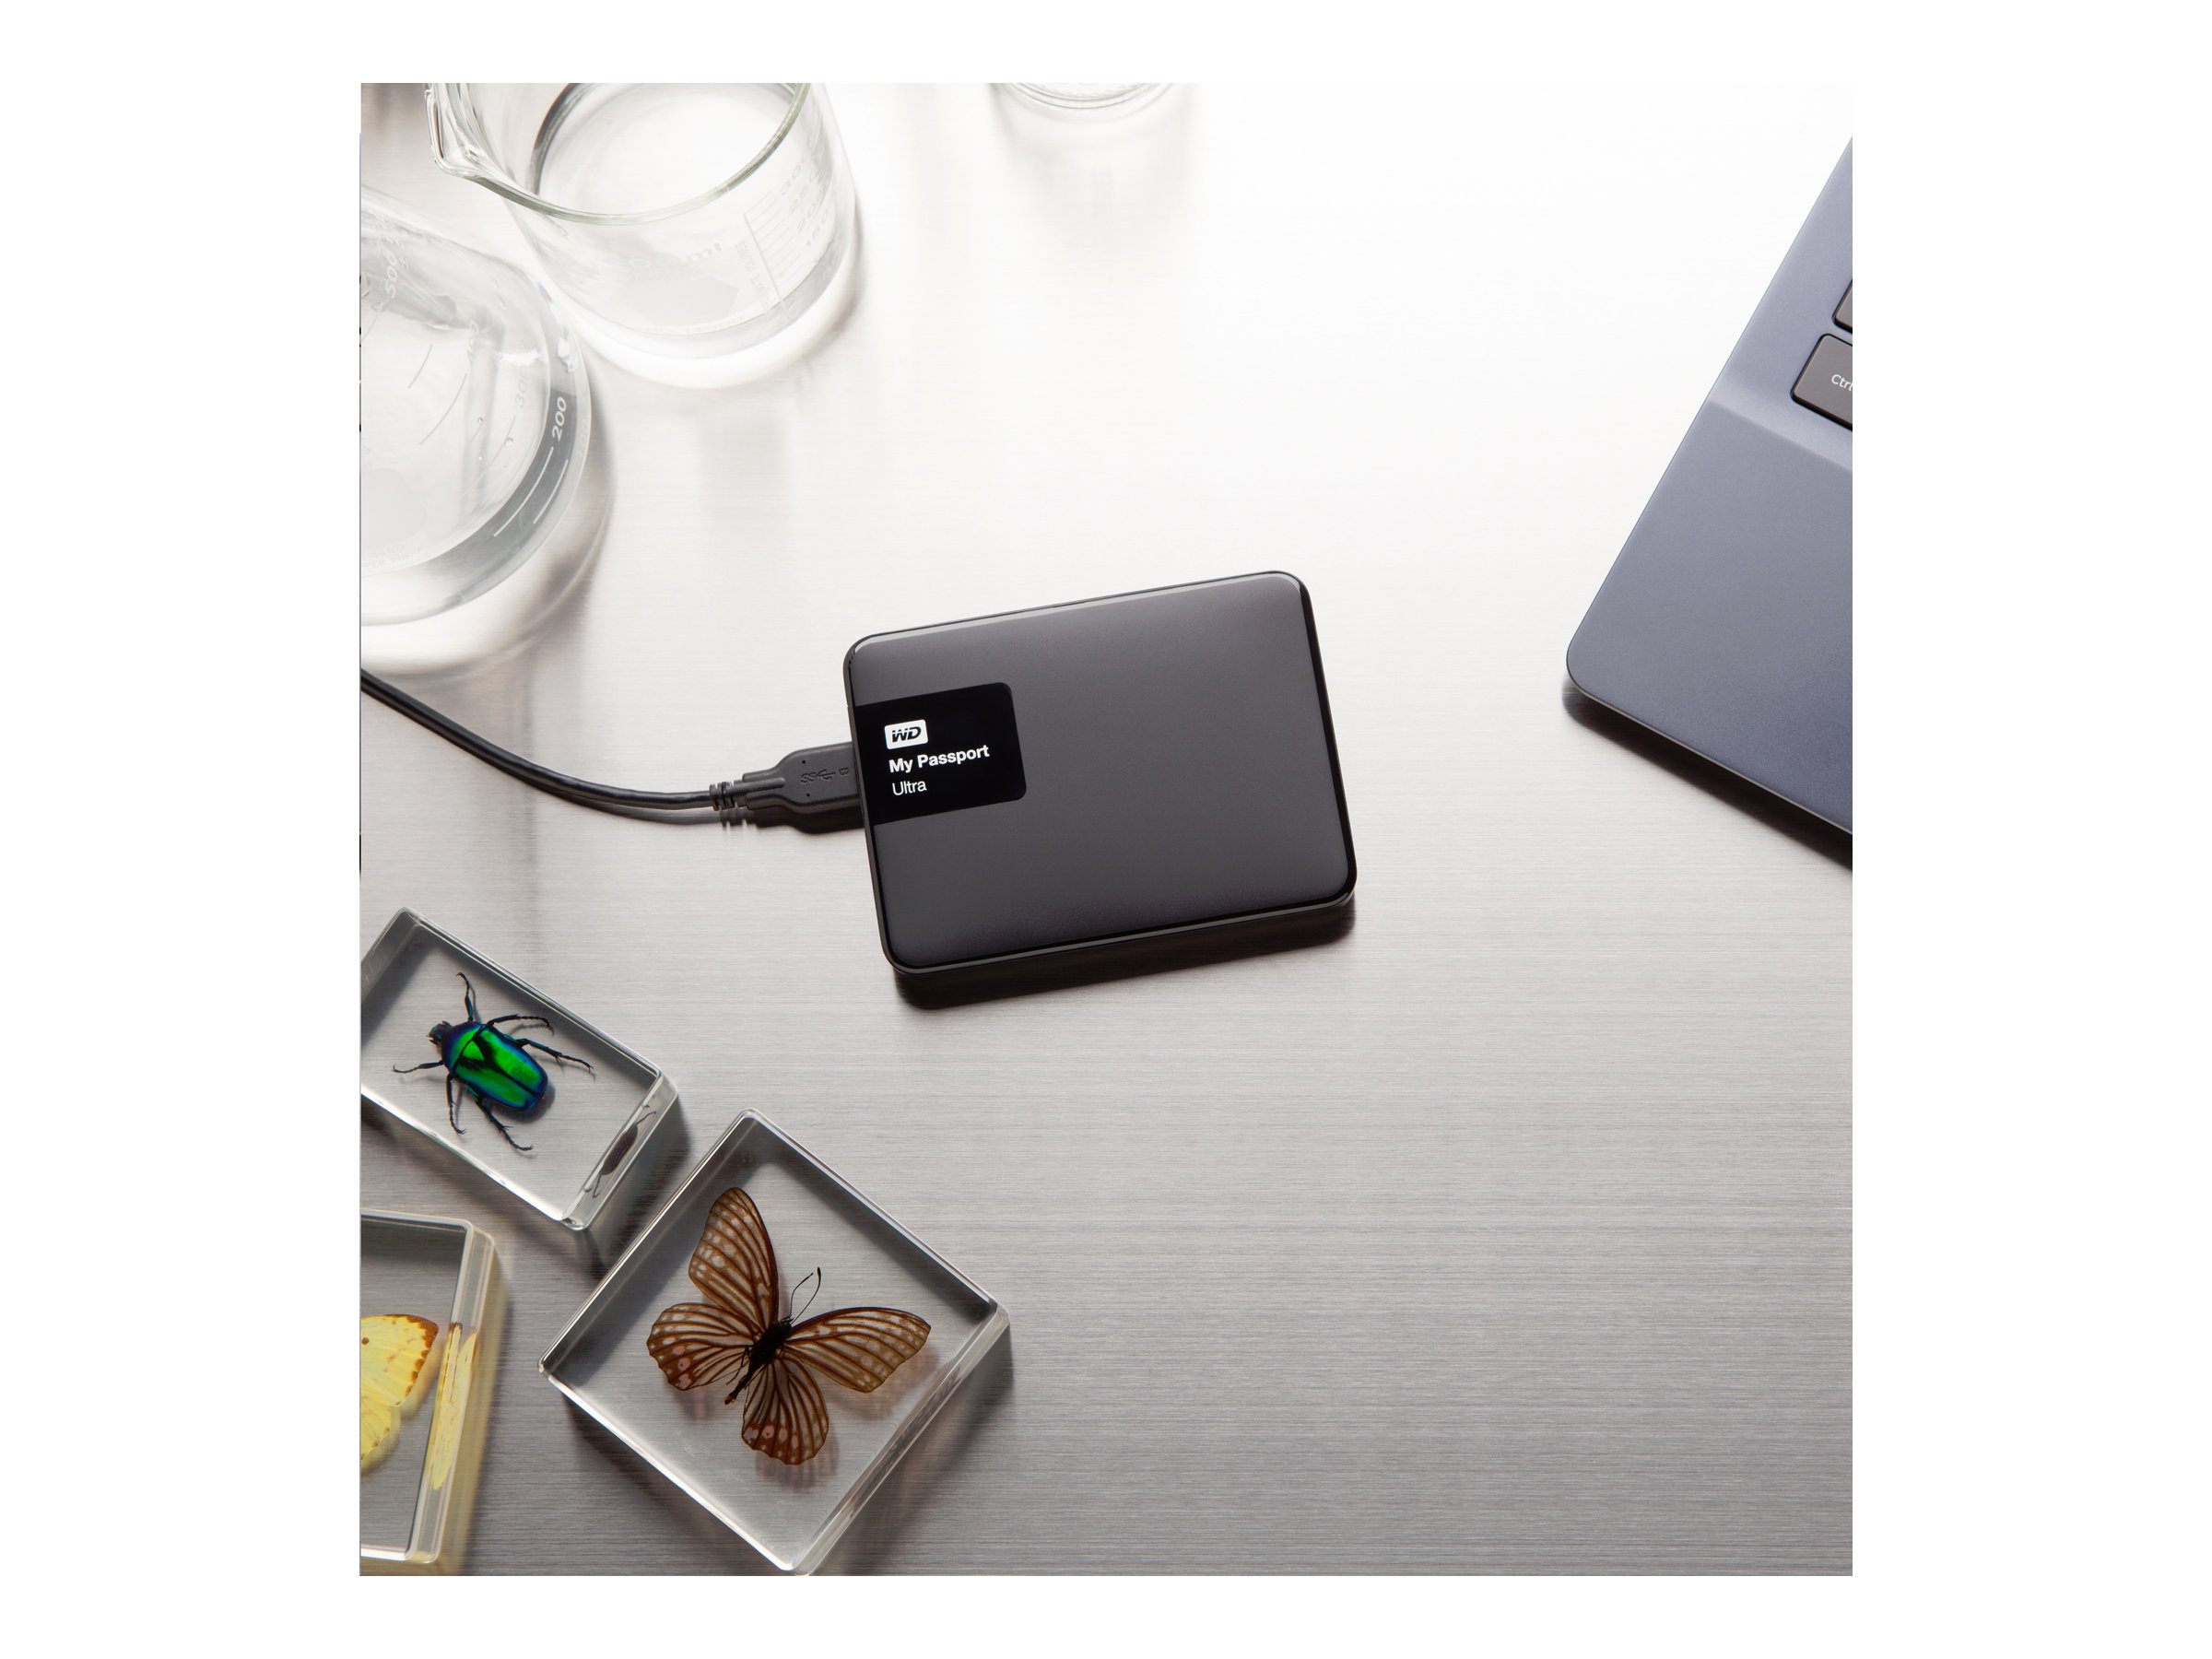 WD My Passport Ultra 500GB USB 3.0 Secure portable drive with auto backup Classic Black - image 2 of 6